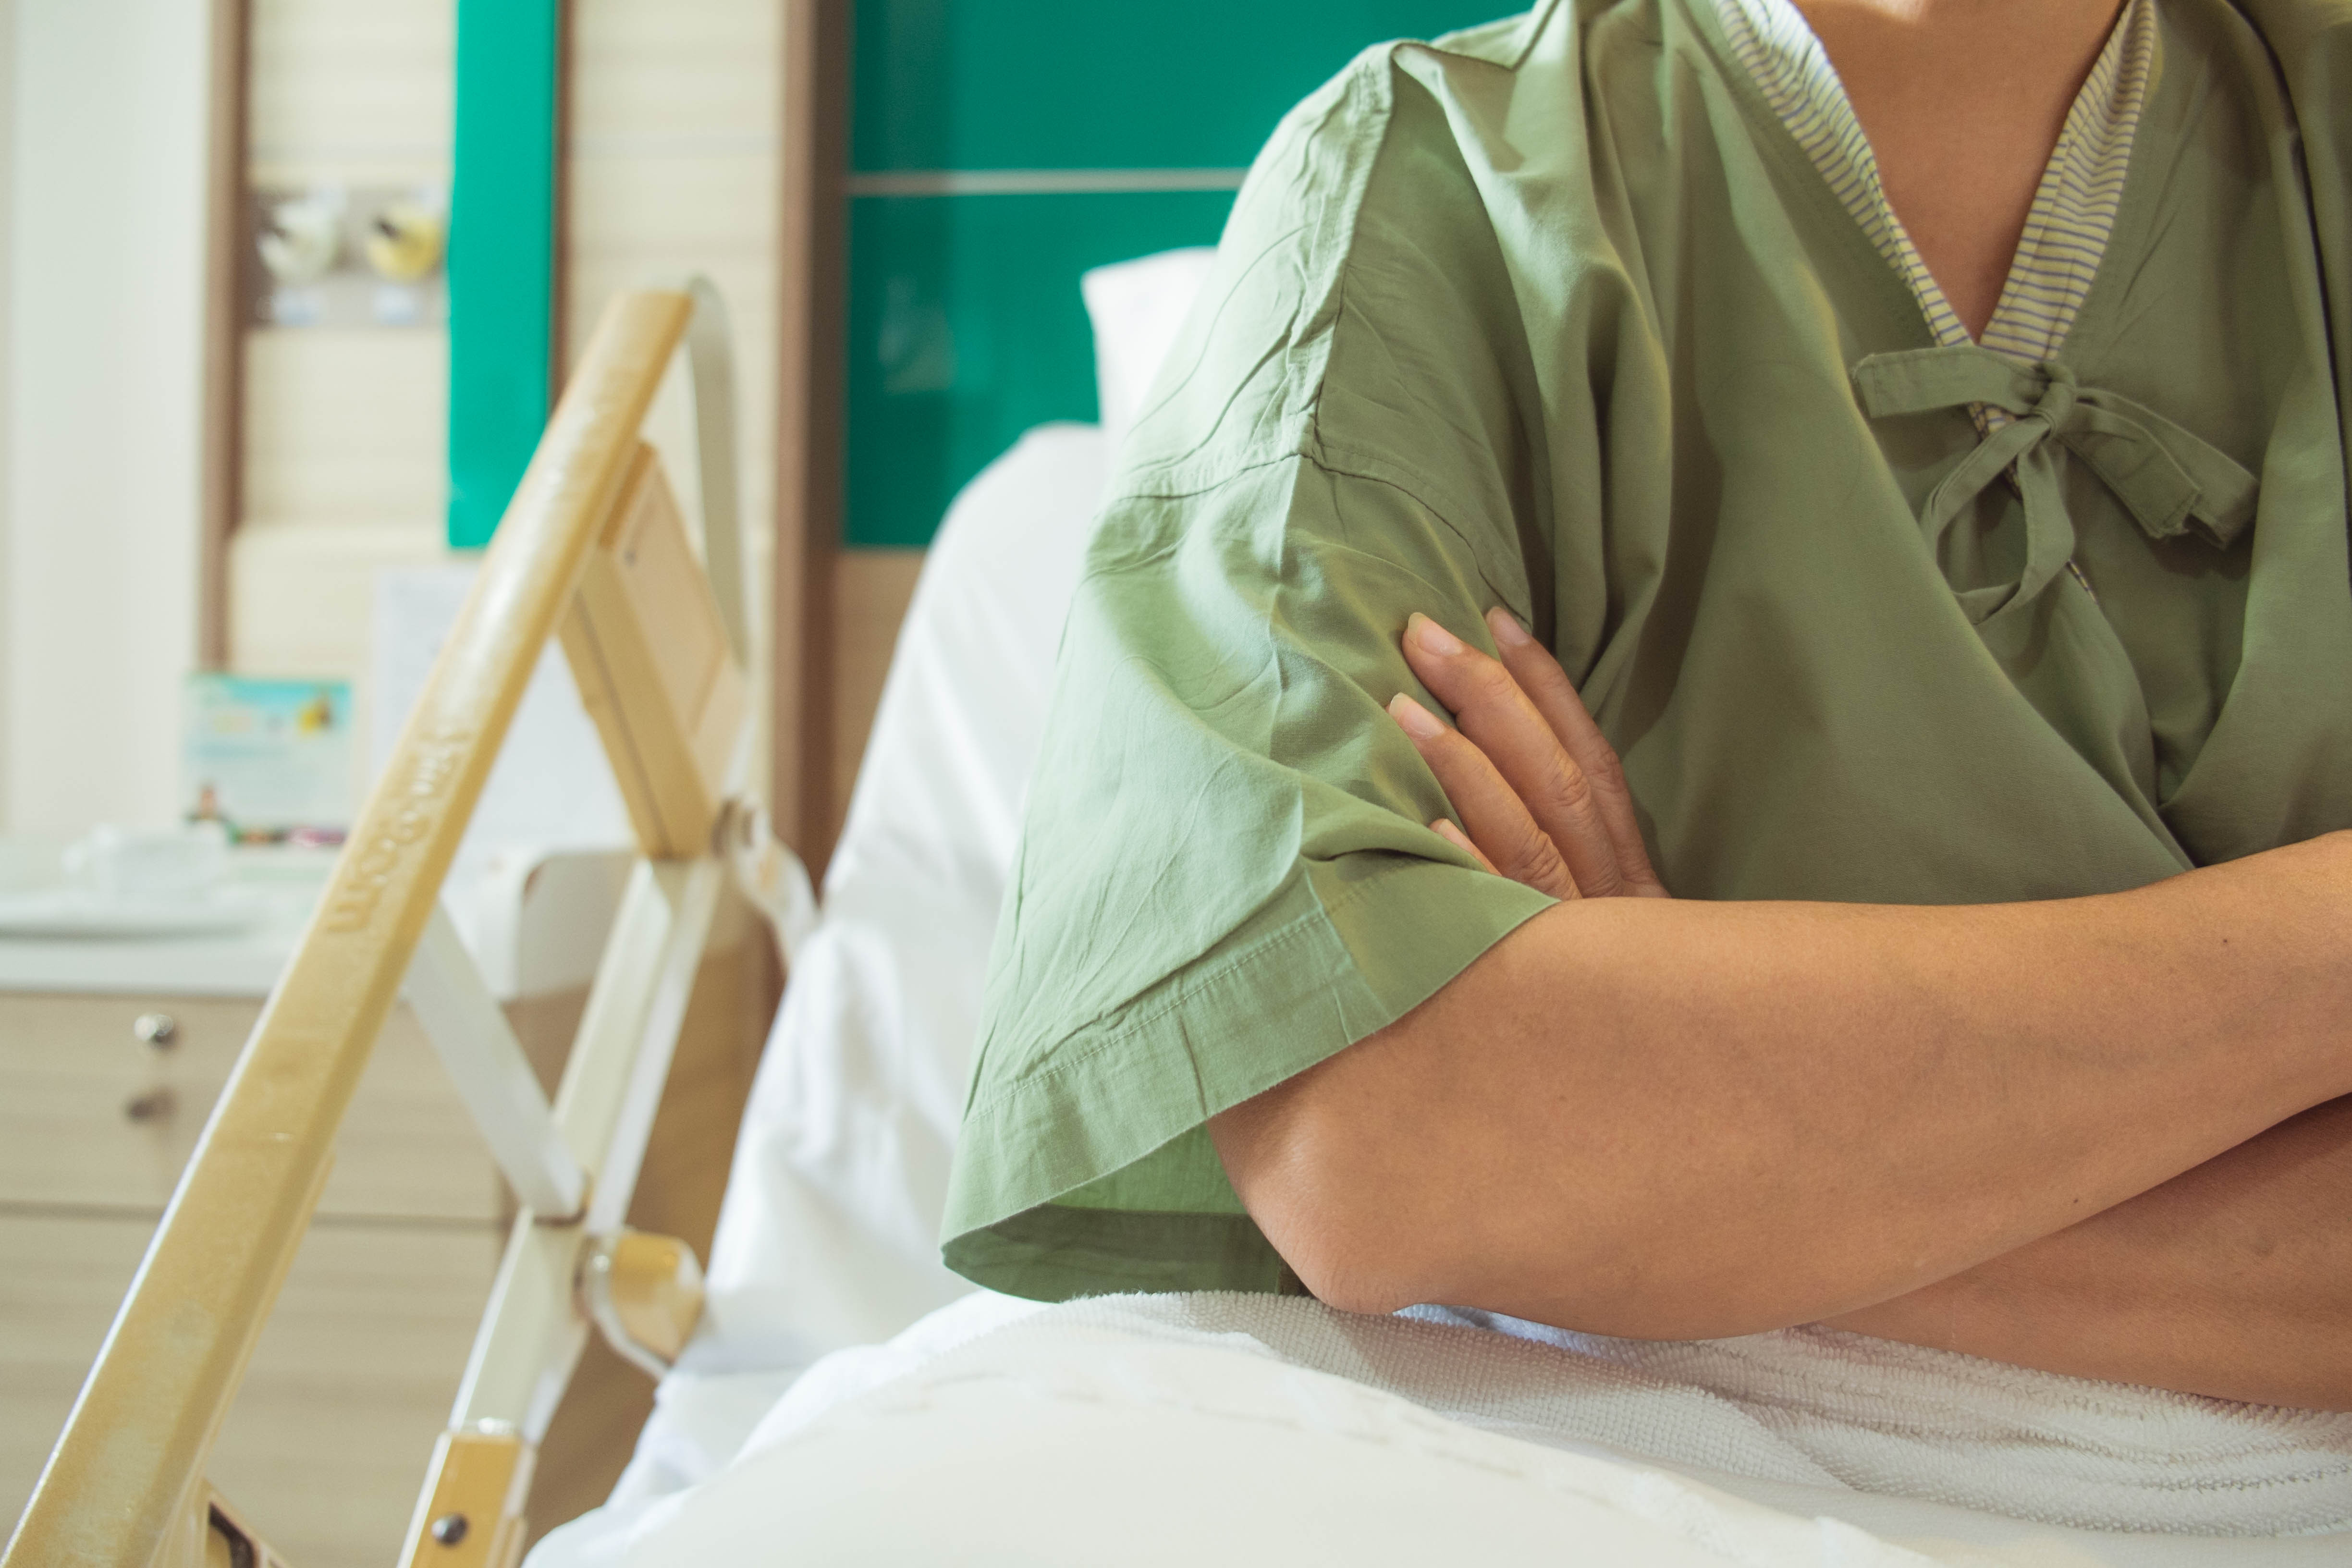 An angry woman in the hospital | Source: Shutterstock